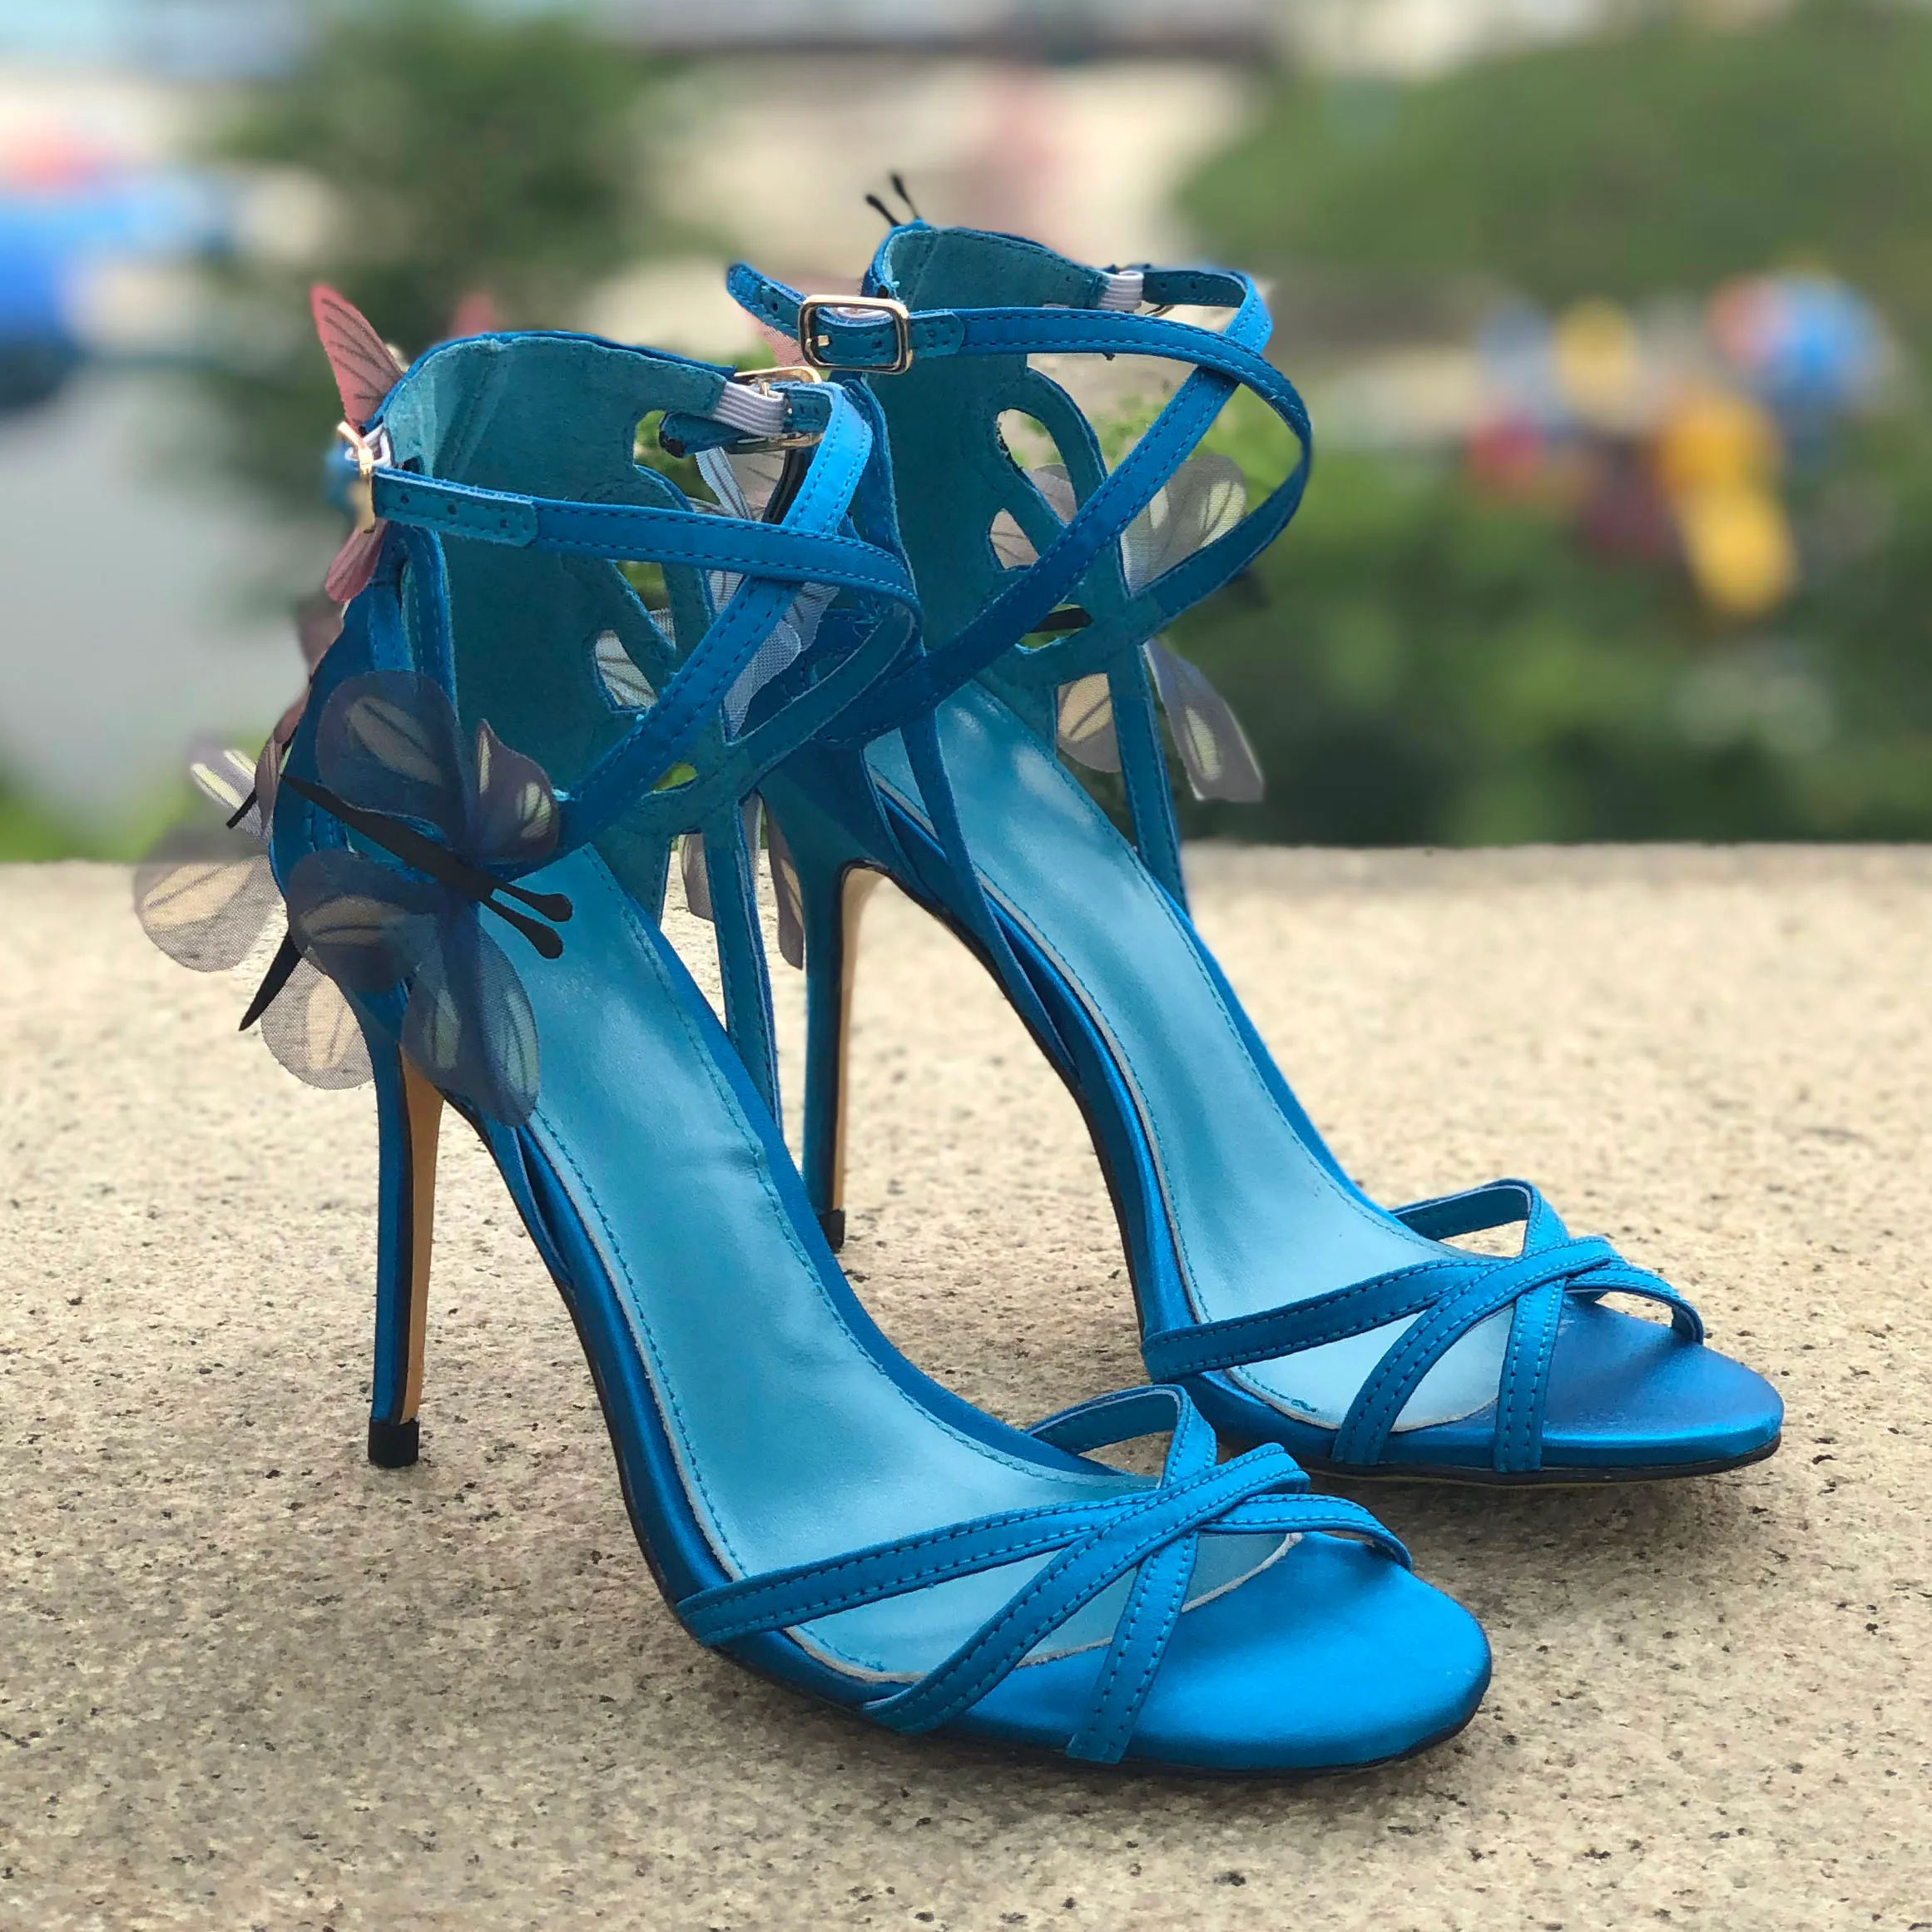 Buy SIZE 7 Shoes Teal & Black Medium Heel, Peep Toe Slingbacks, Something Blue  Shoes Formal Evening Satin Pumps, Comfortable Heel, Pageant, Prom Online in  India - Etsy